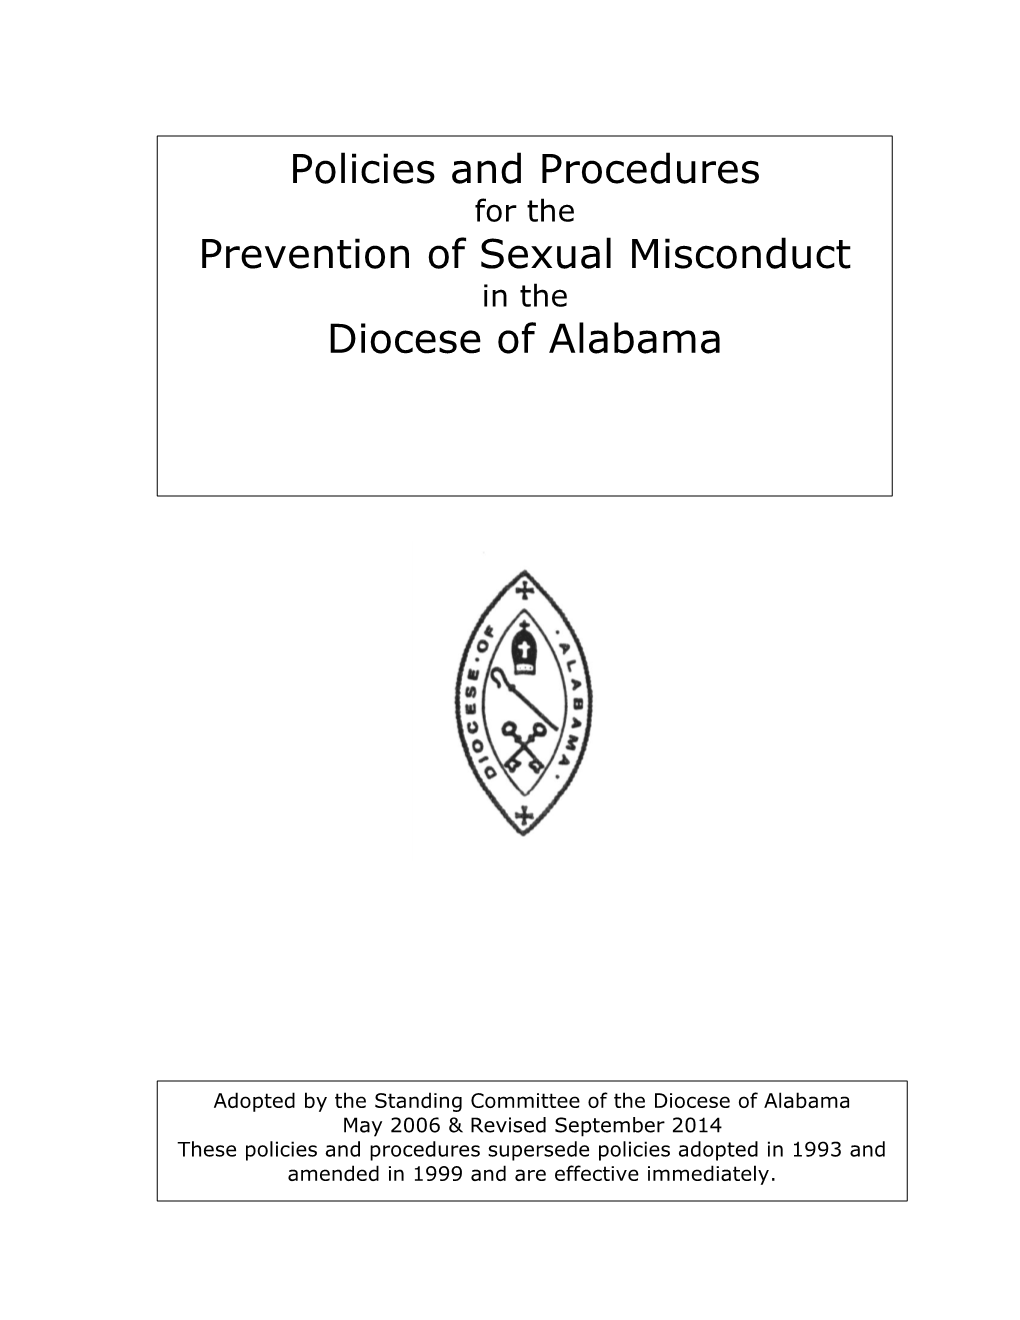 Policies and Procedures Prevention of Sexual Misconduct Diocese of Alabama